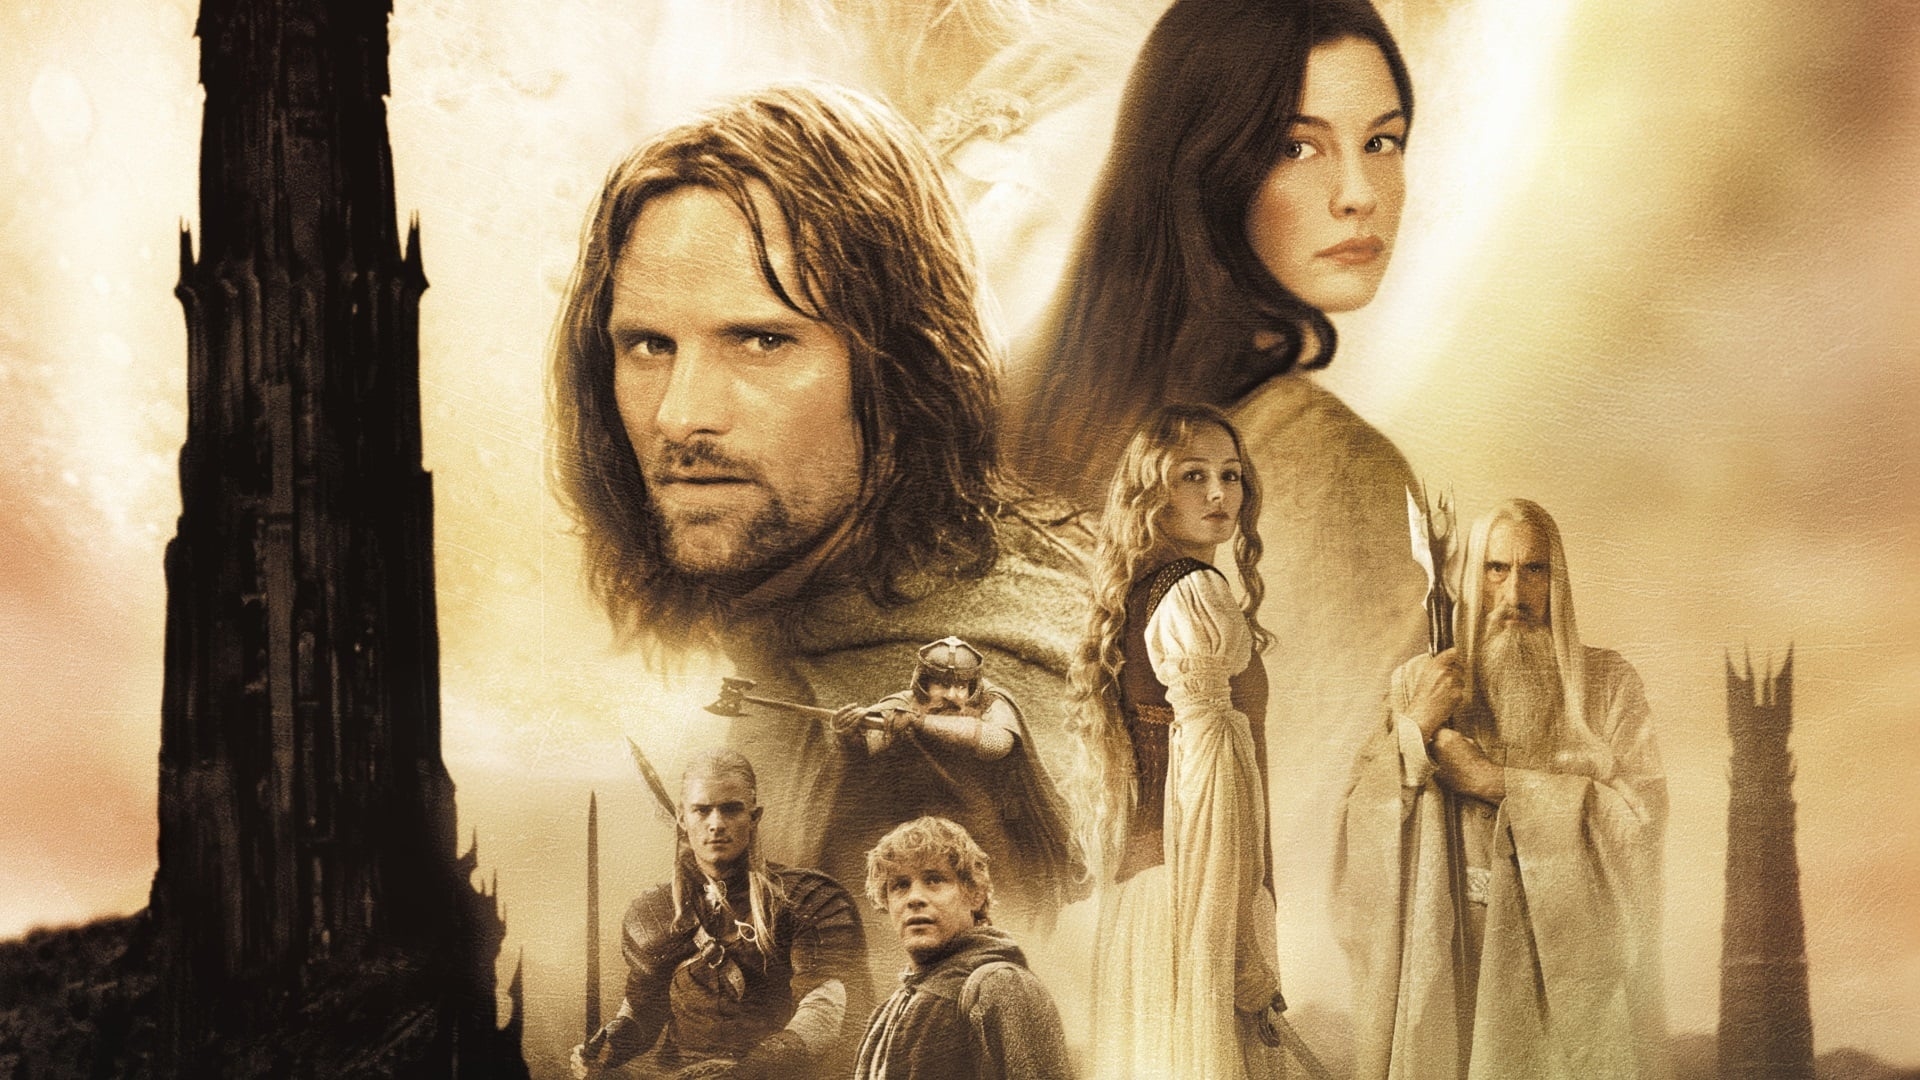 The Lord of the Rings: The Two Towers download the last version for apple